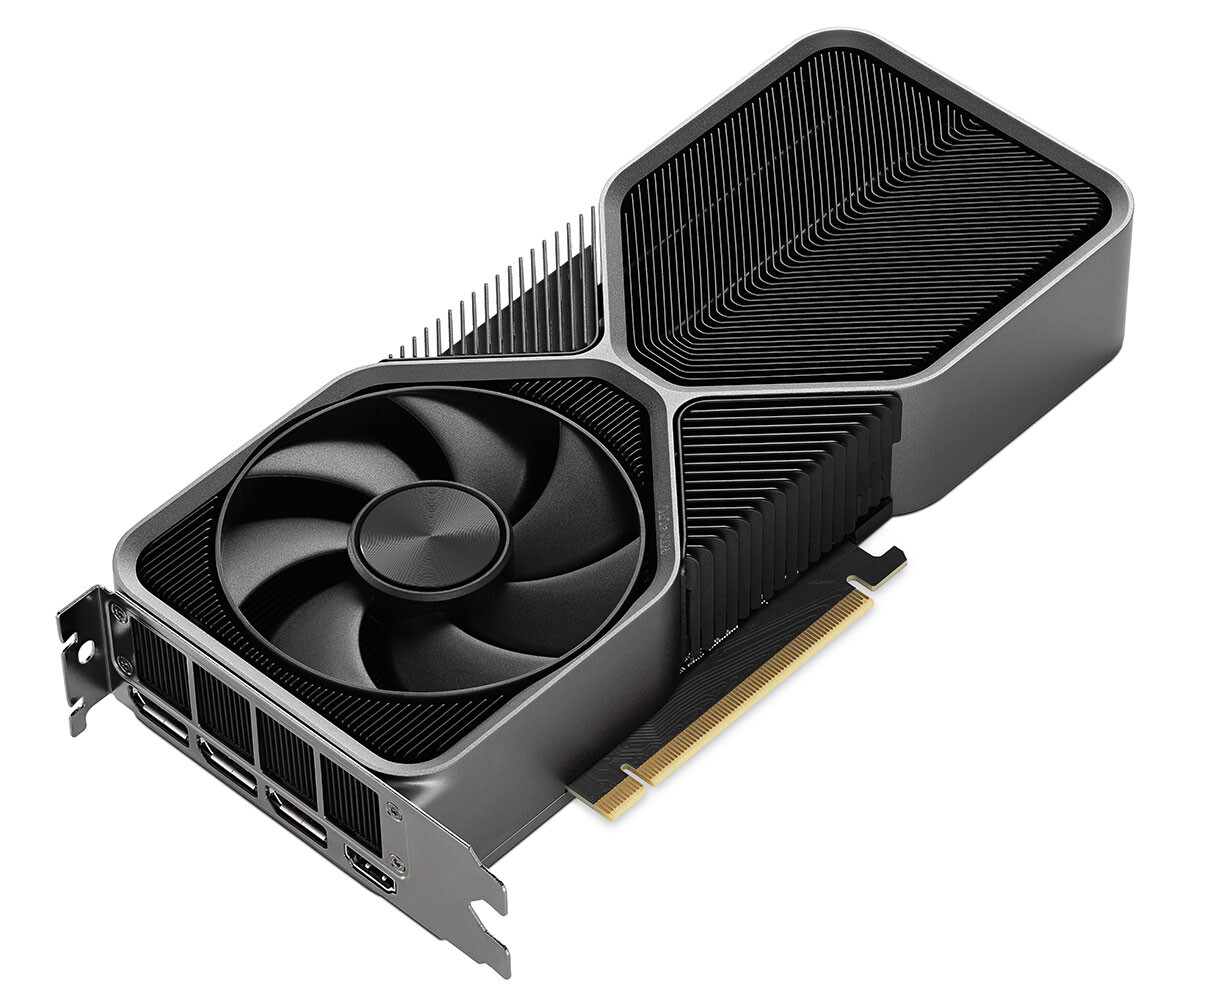 Nvidia RTX 4080 is almost here -- with wildly varying prices